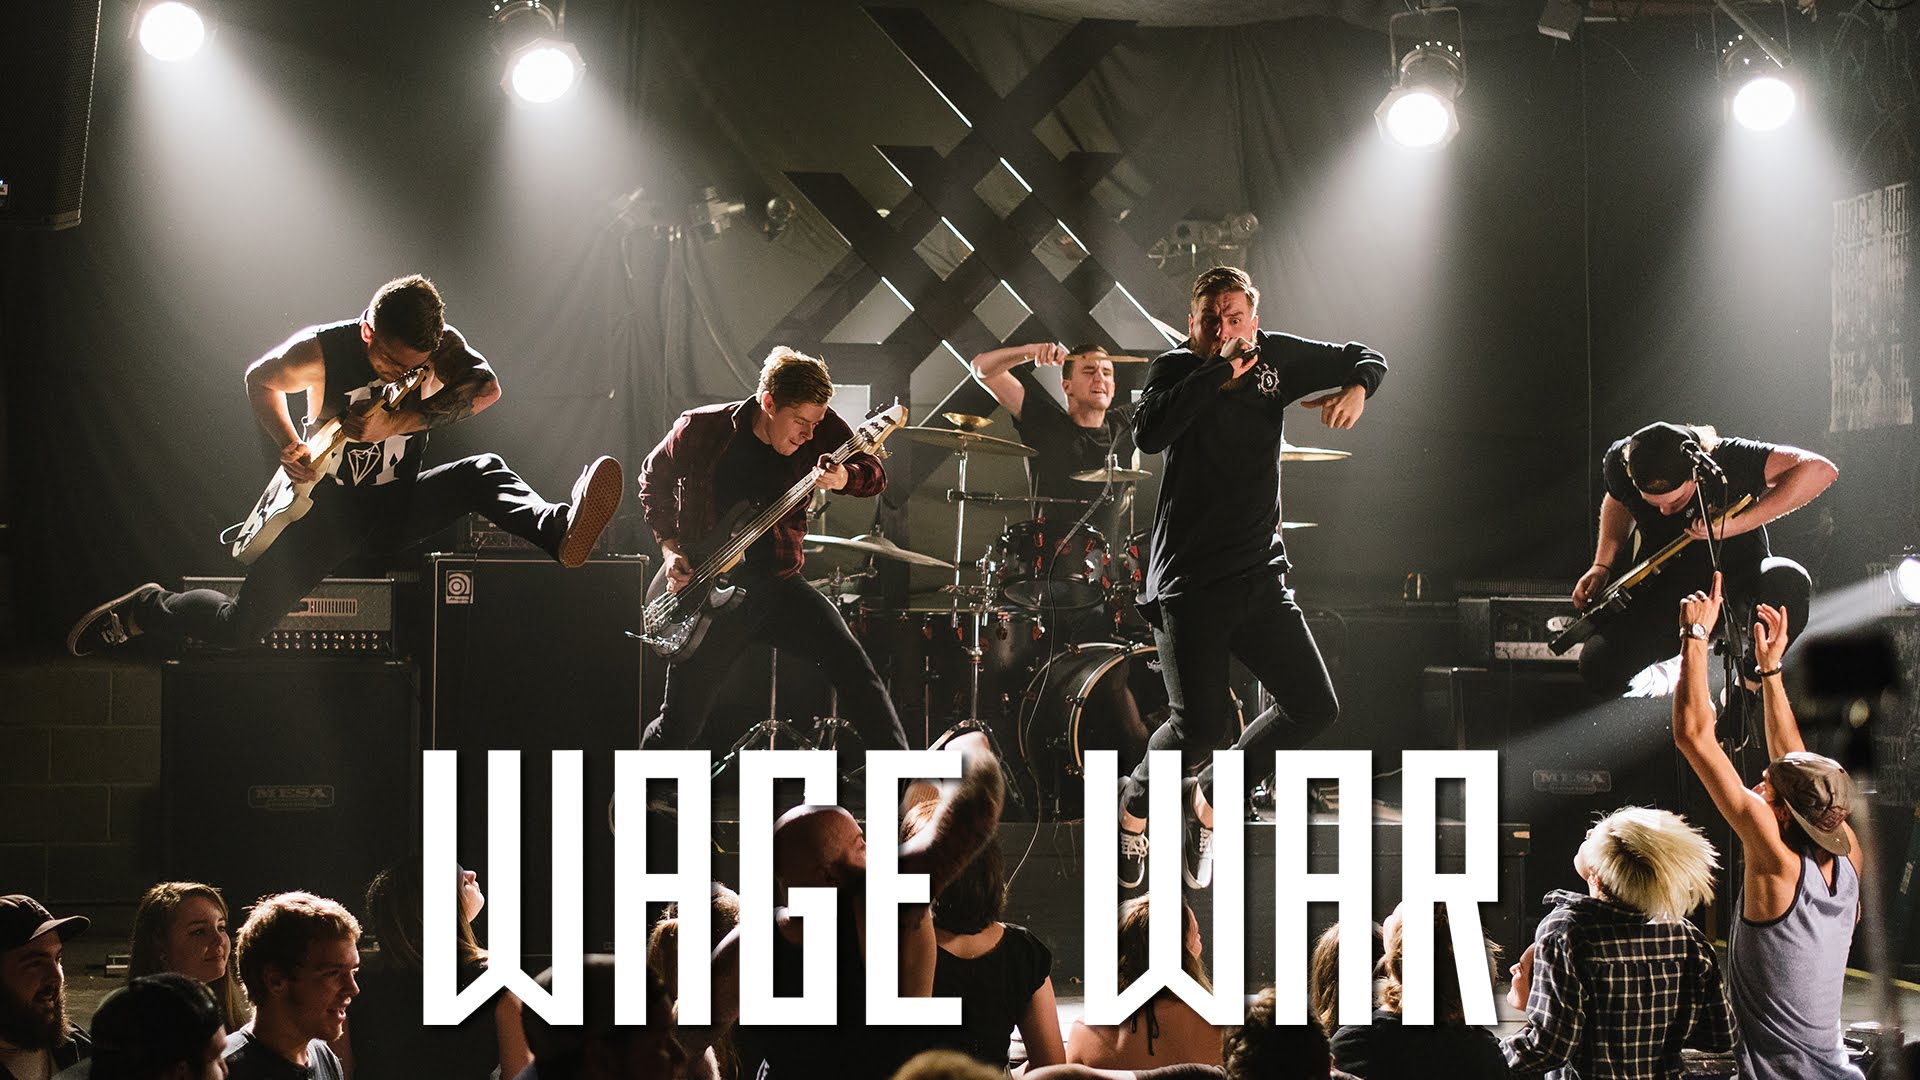 Wage War Wallpapers